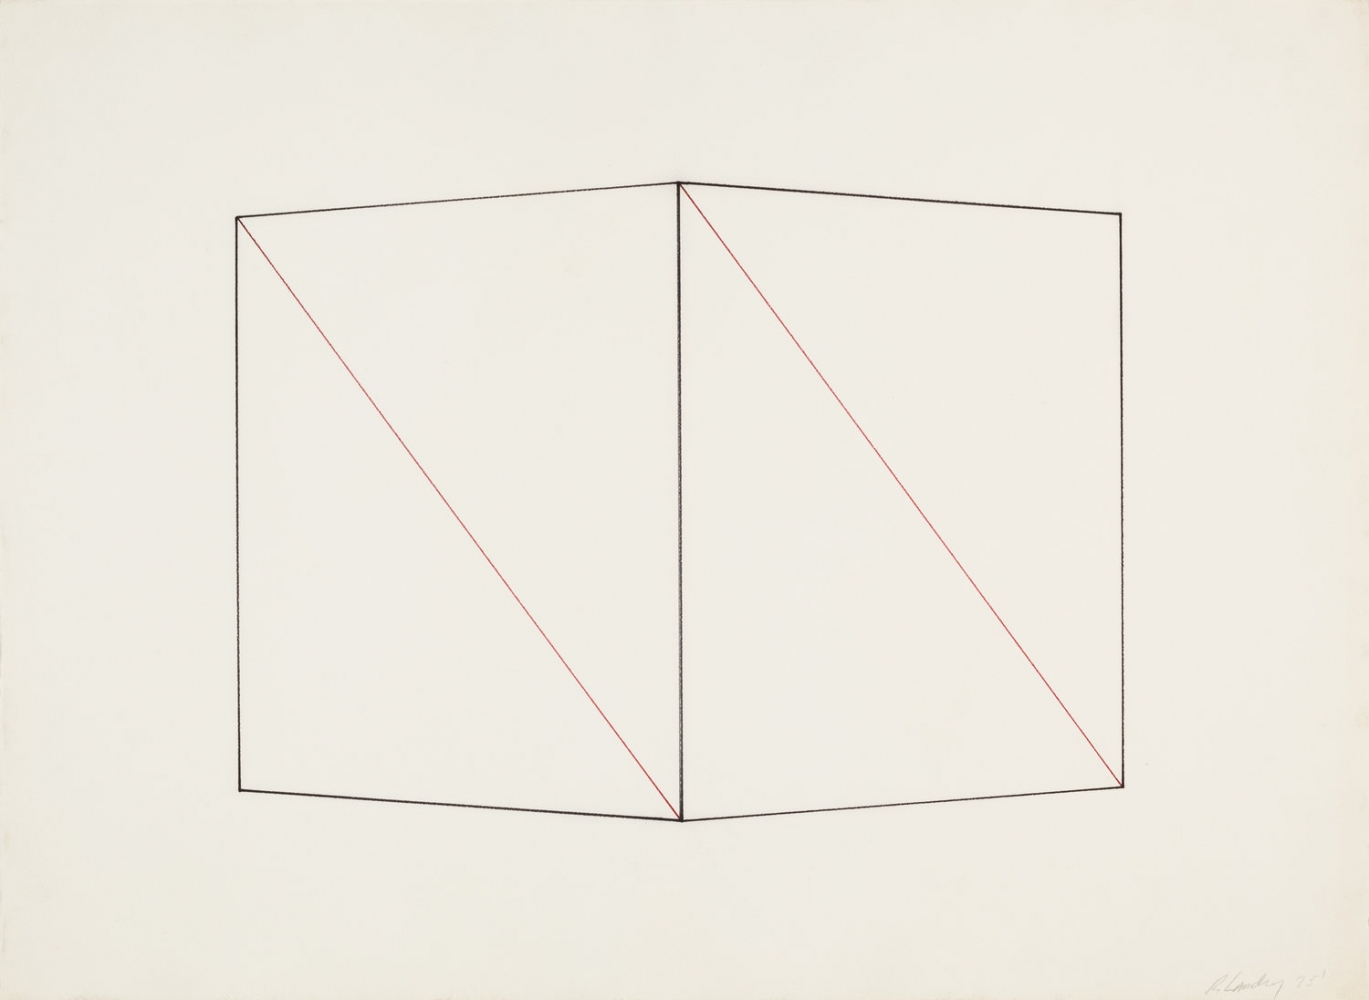 Dickie Landry
Drawing 2, 1975
Color pencil on paper
24 x 32 inches